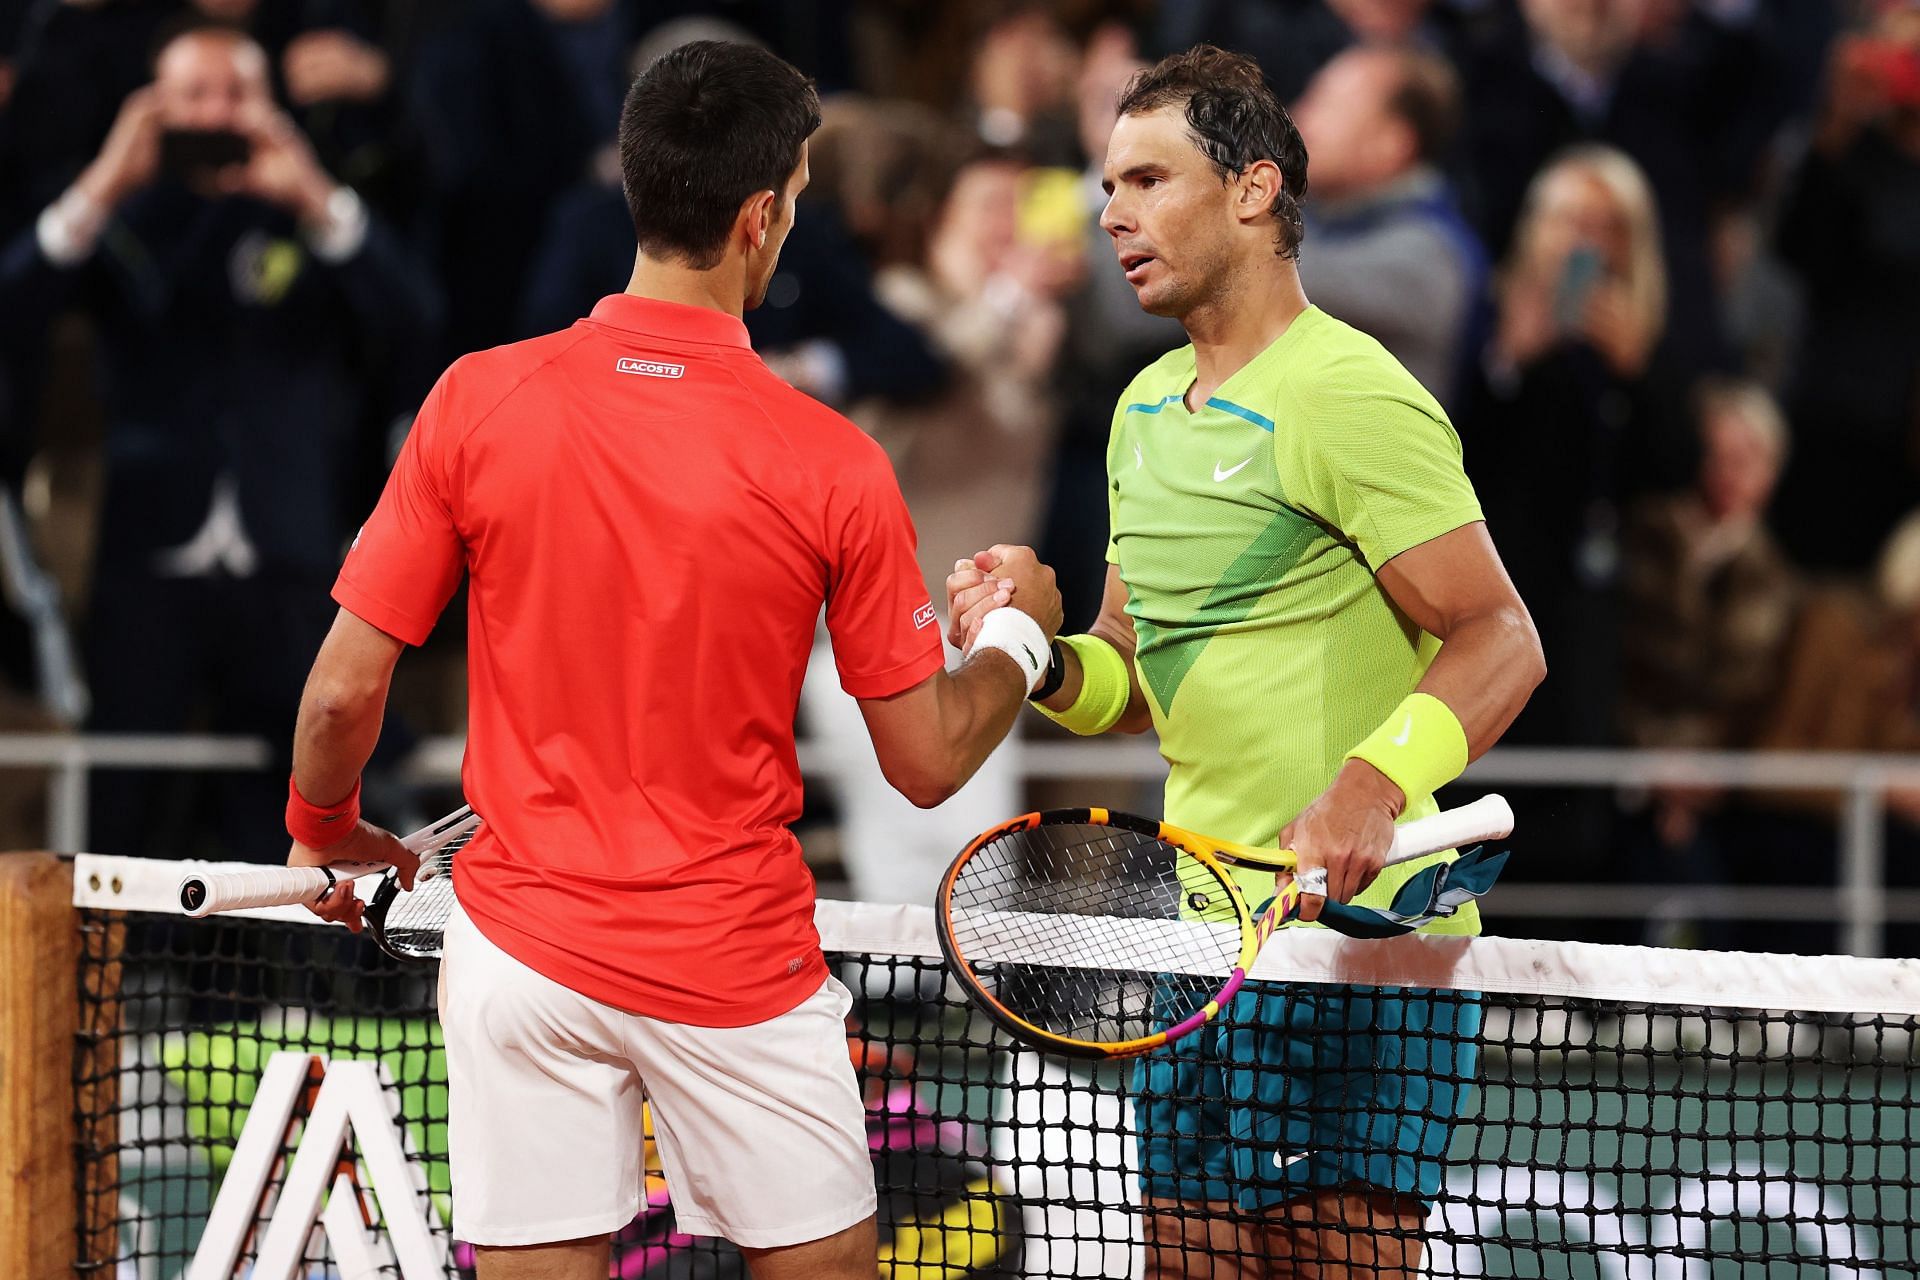 Nadal won against Djokovic at 2022 French Open